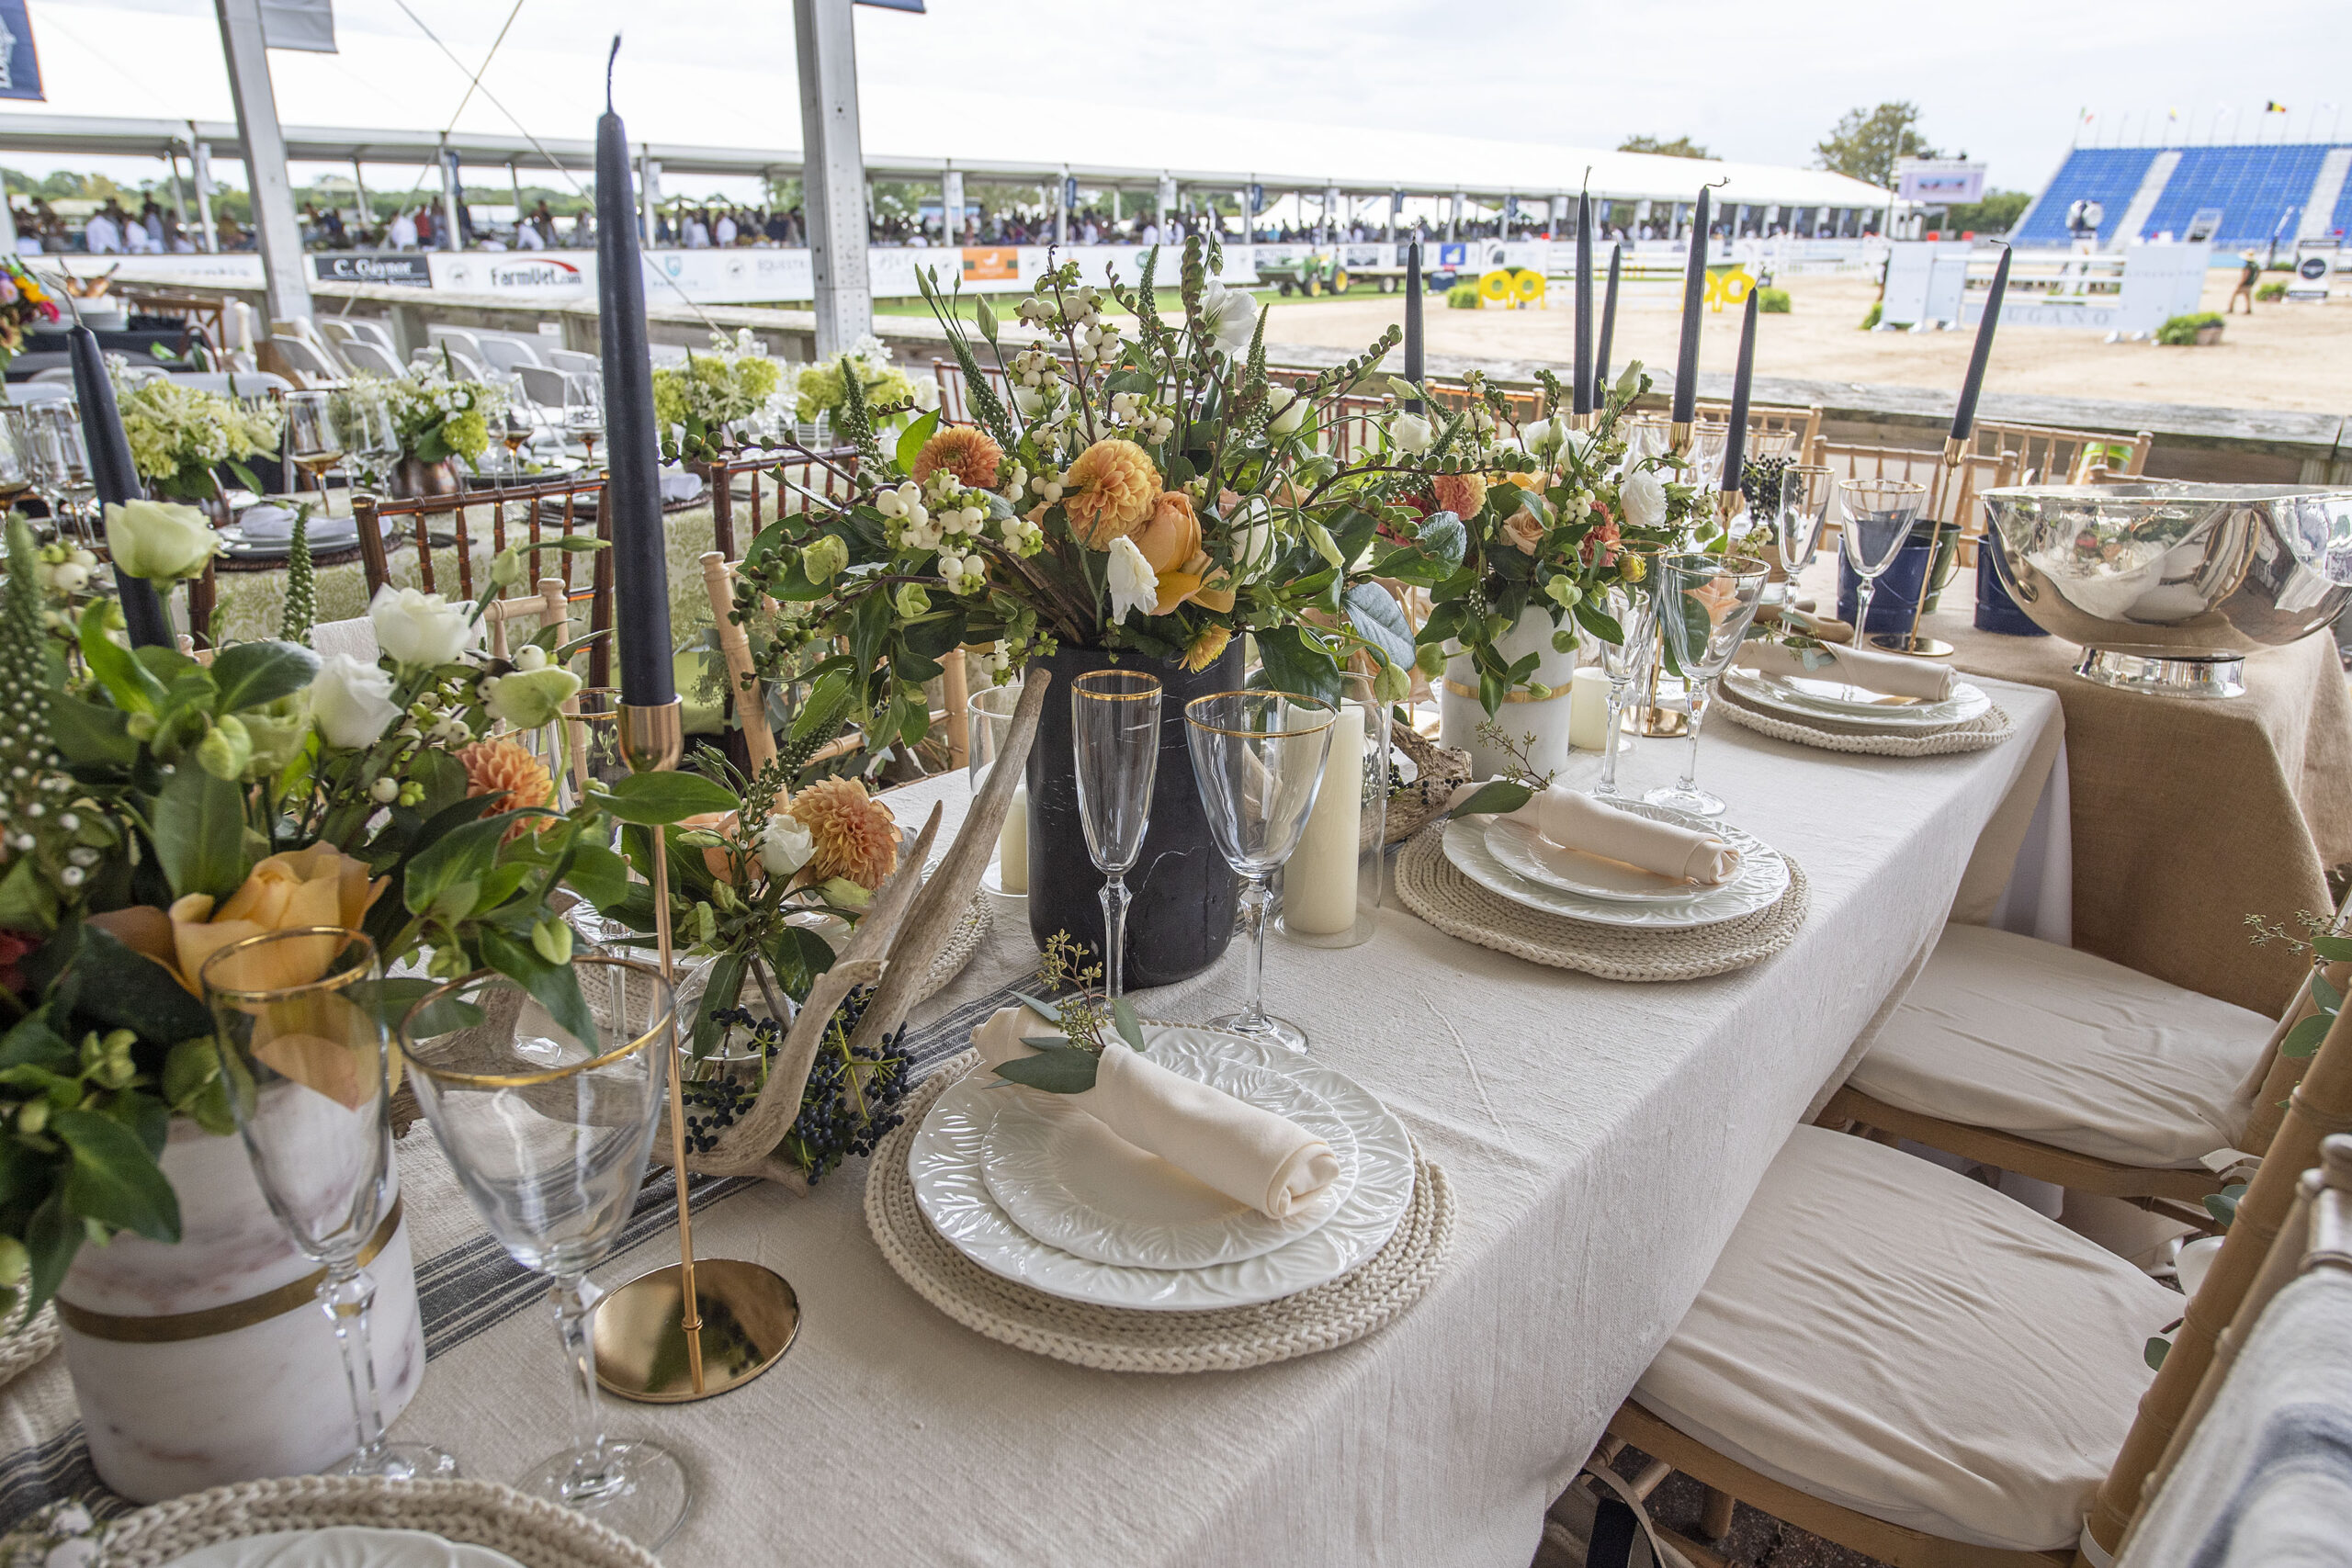 The table setting for the Jabord table in the VIP tent at the 2021 Hampton Classic on Grand Prix Sunday, September 5th, 2021